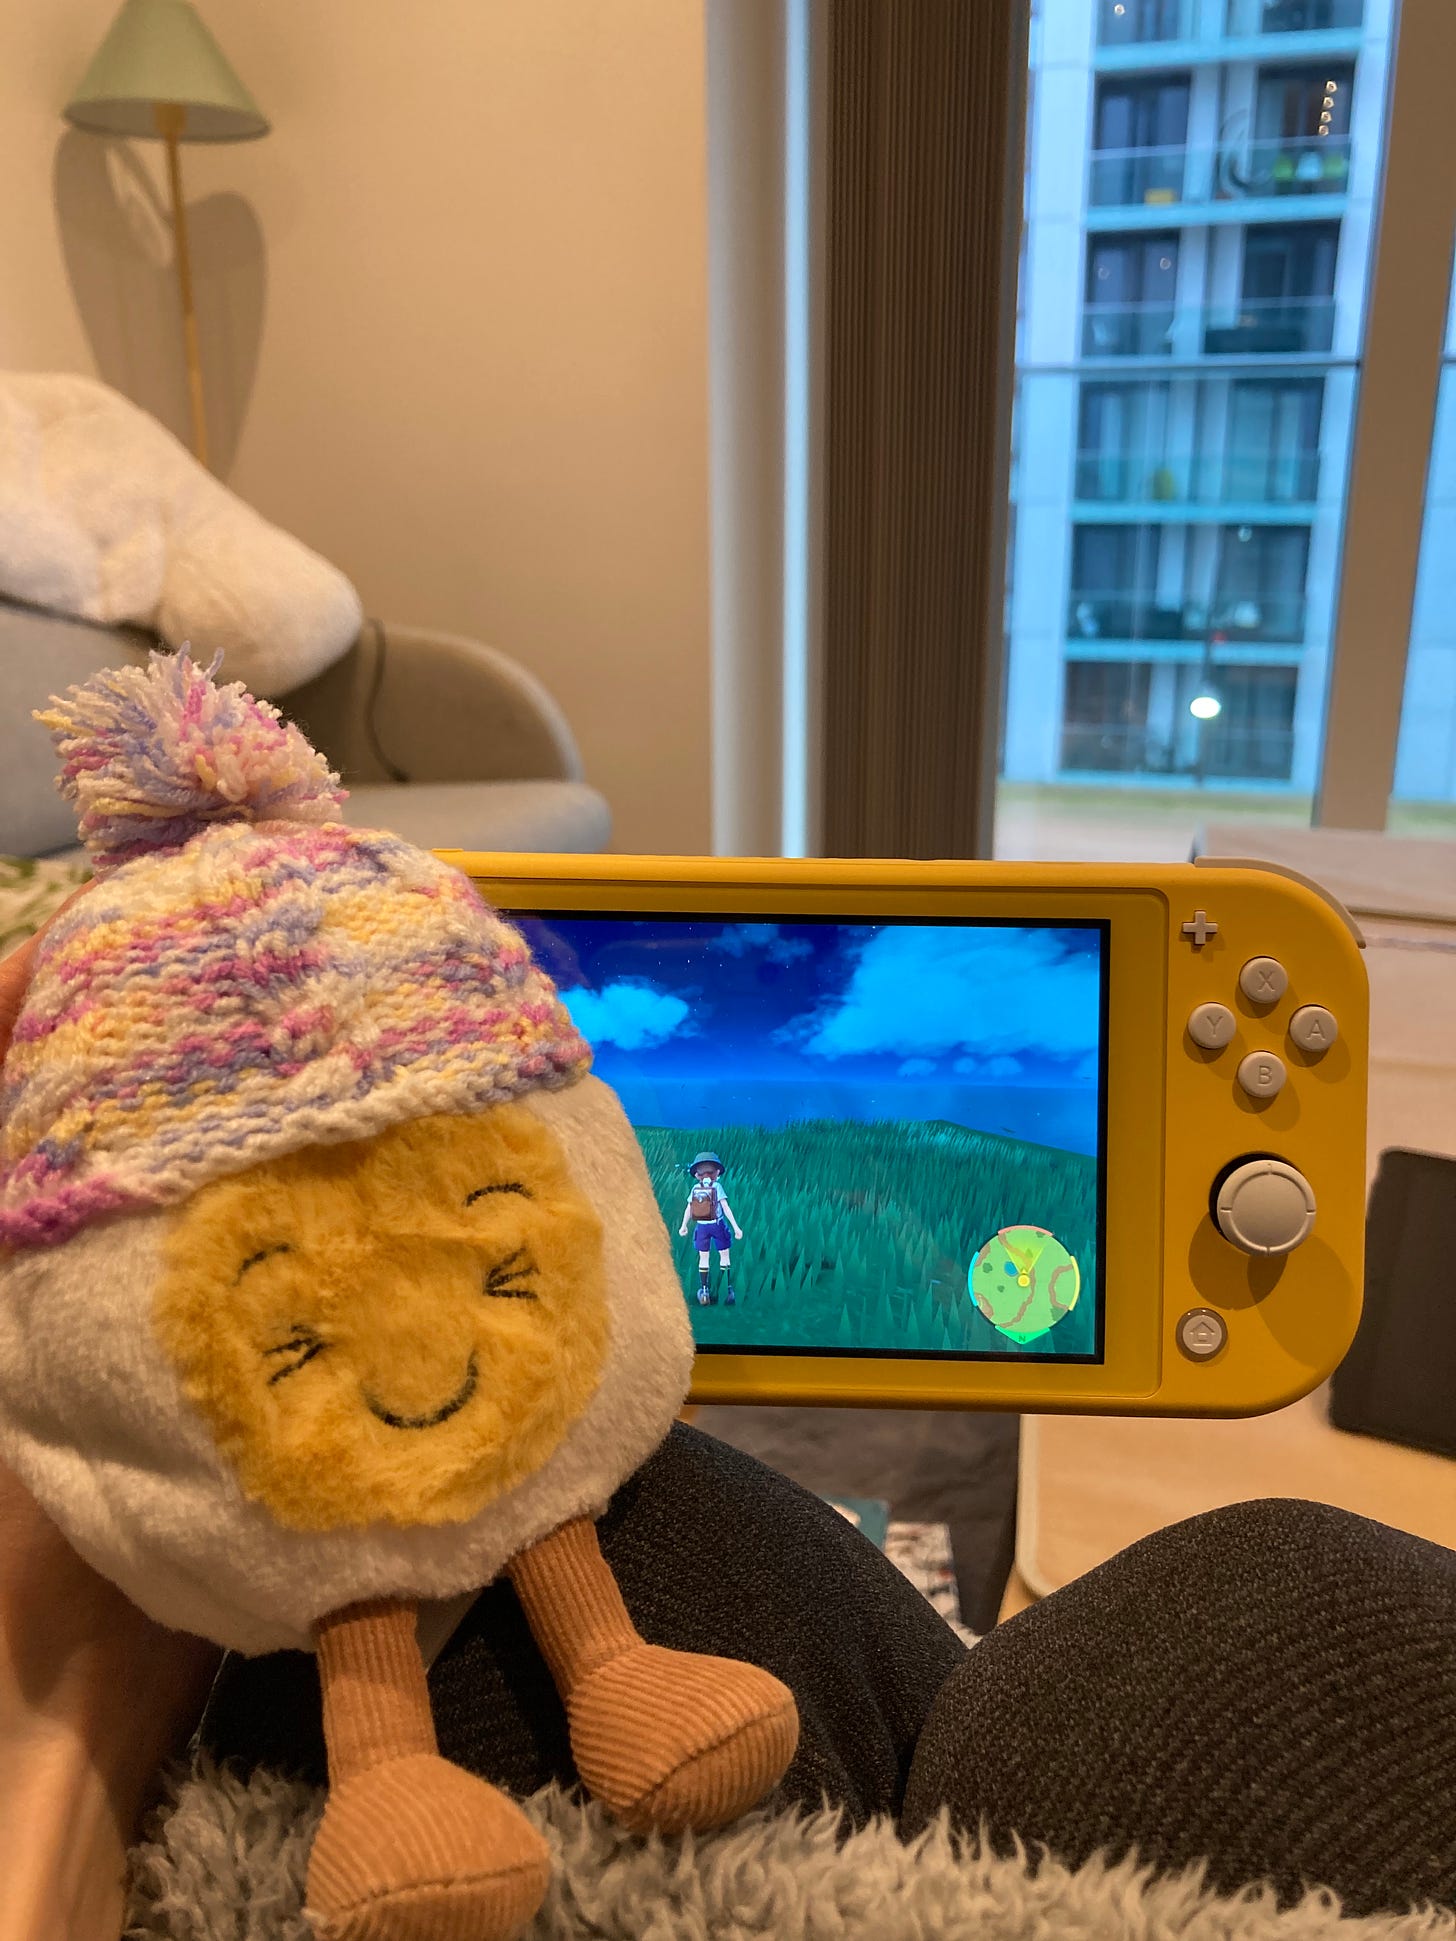 Photograph of dippy the soft toy boiled egg wearing a mini knitted hat, guarding a yellow Nintendo Switch that Beck's hand is holding. The switch displays a pokemon game with the avatar standing on a grassy mountain looking out onto a deep blue sky populated with soft clouds. 